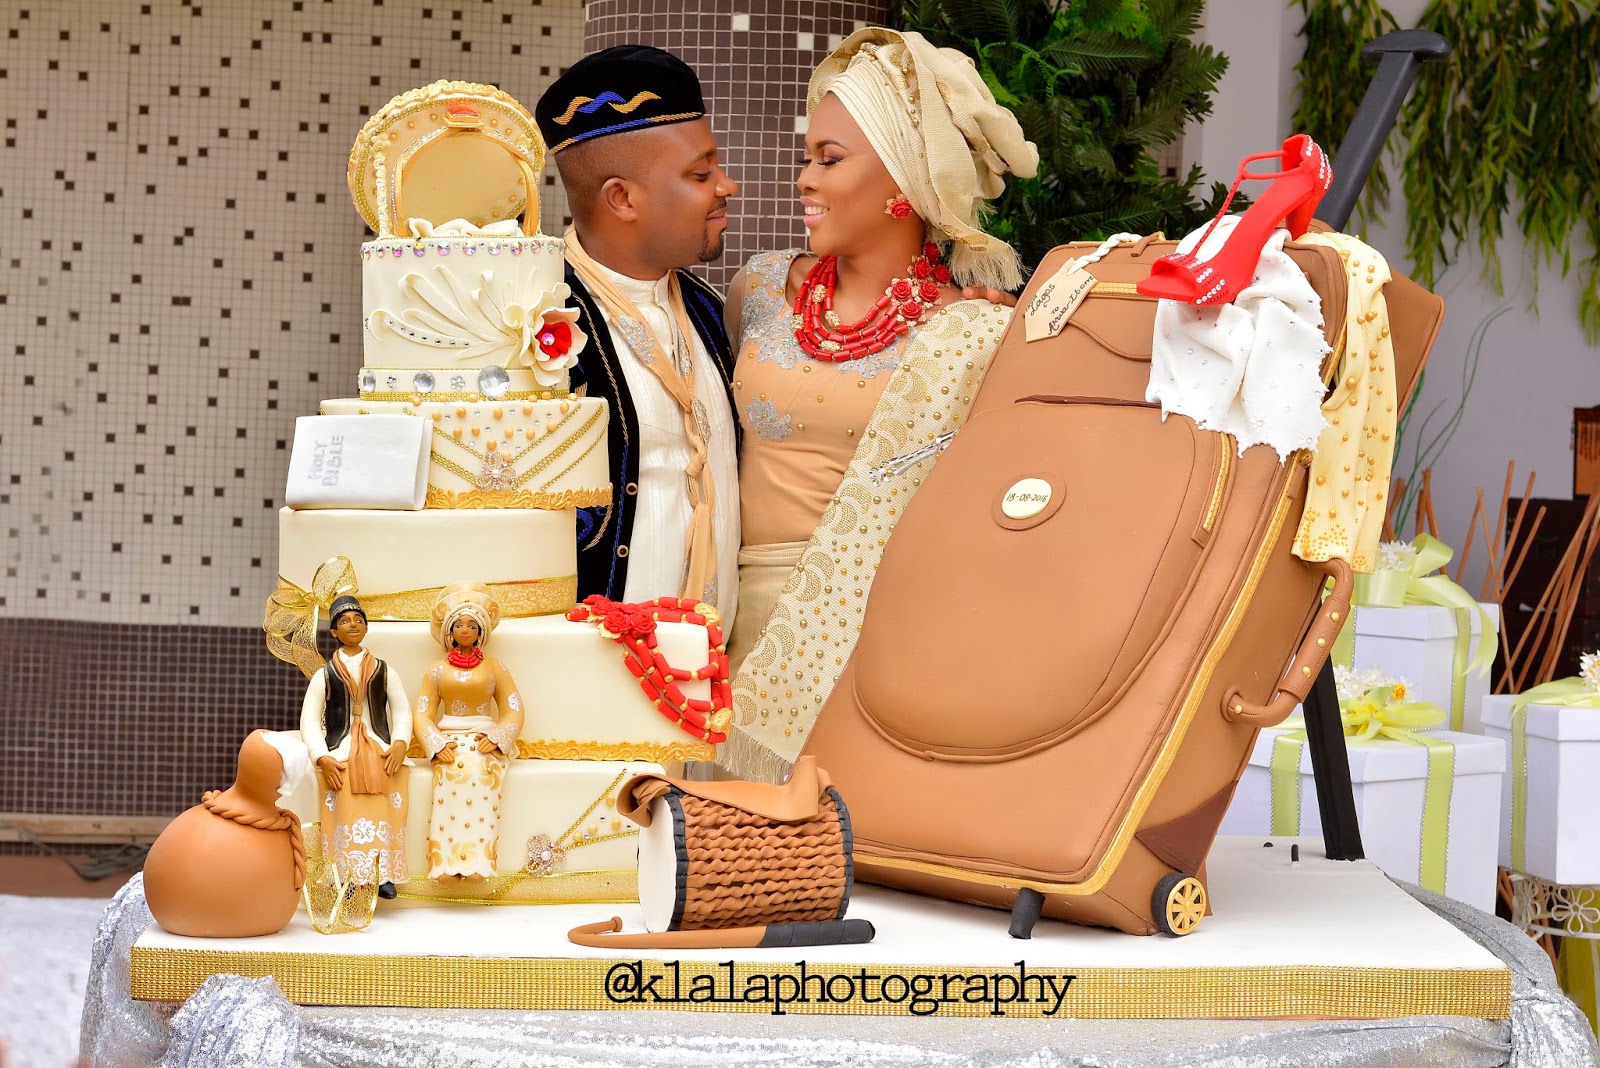 When the baker becomes the bride Olamide of Sweet 